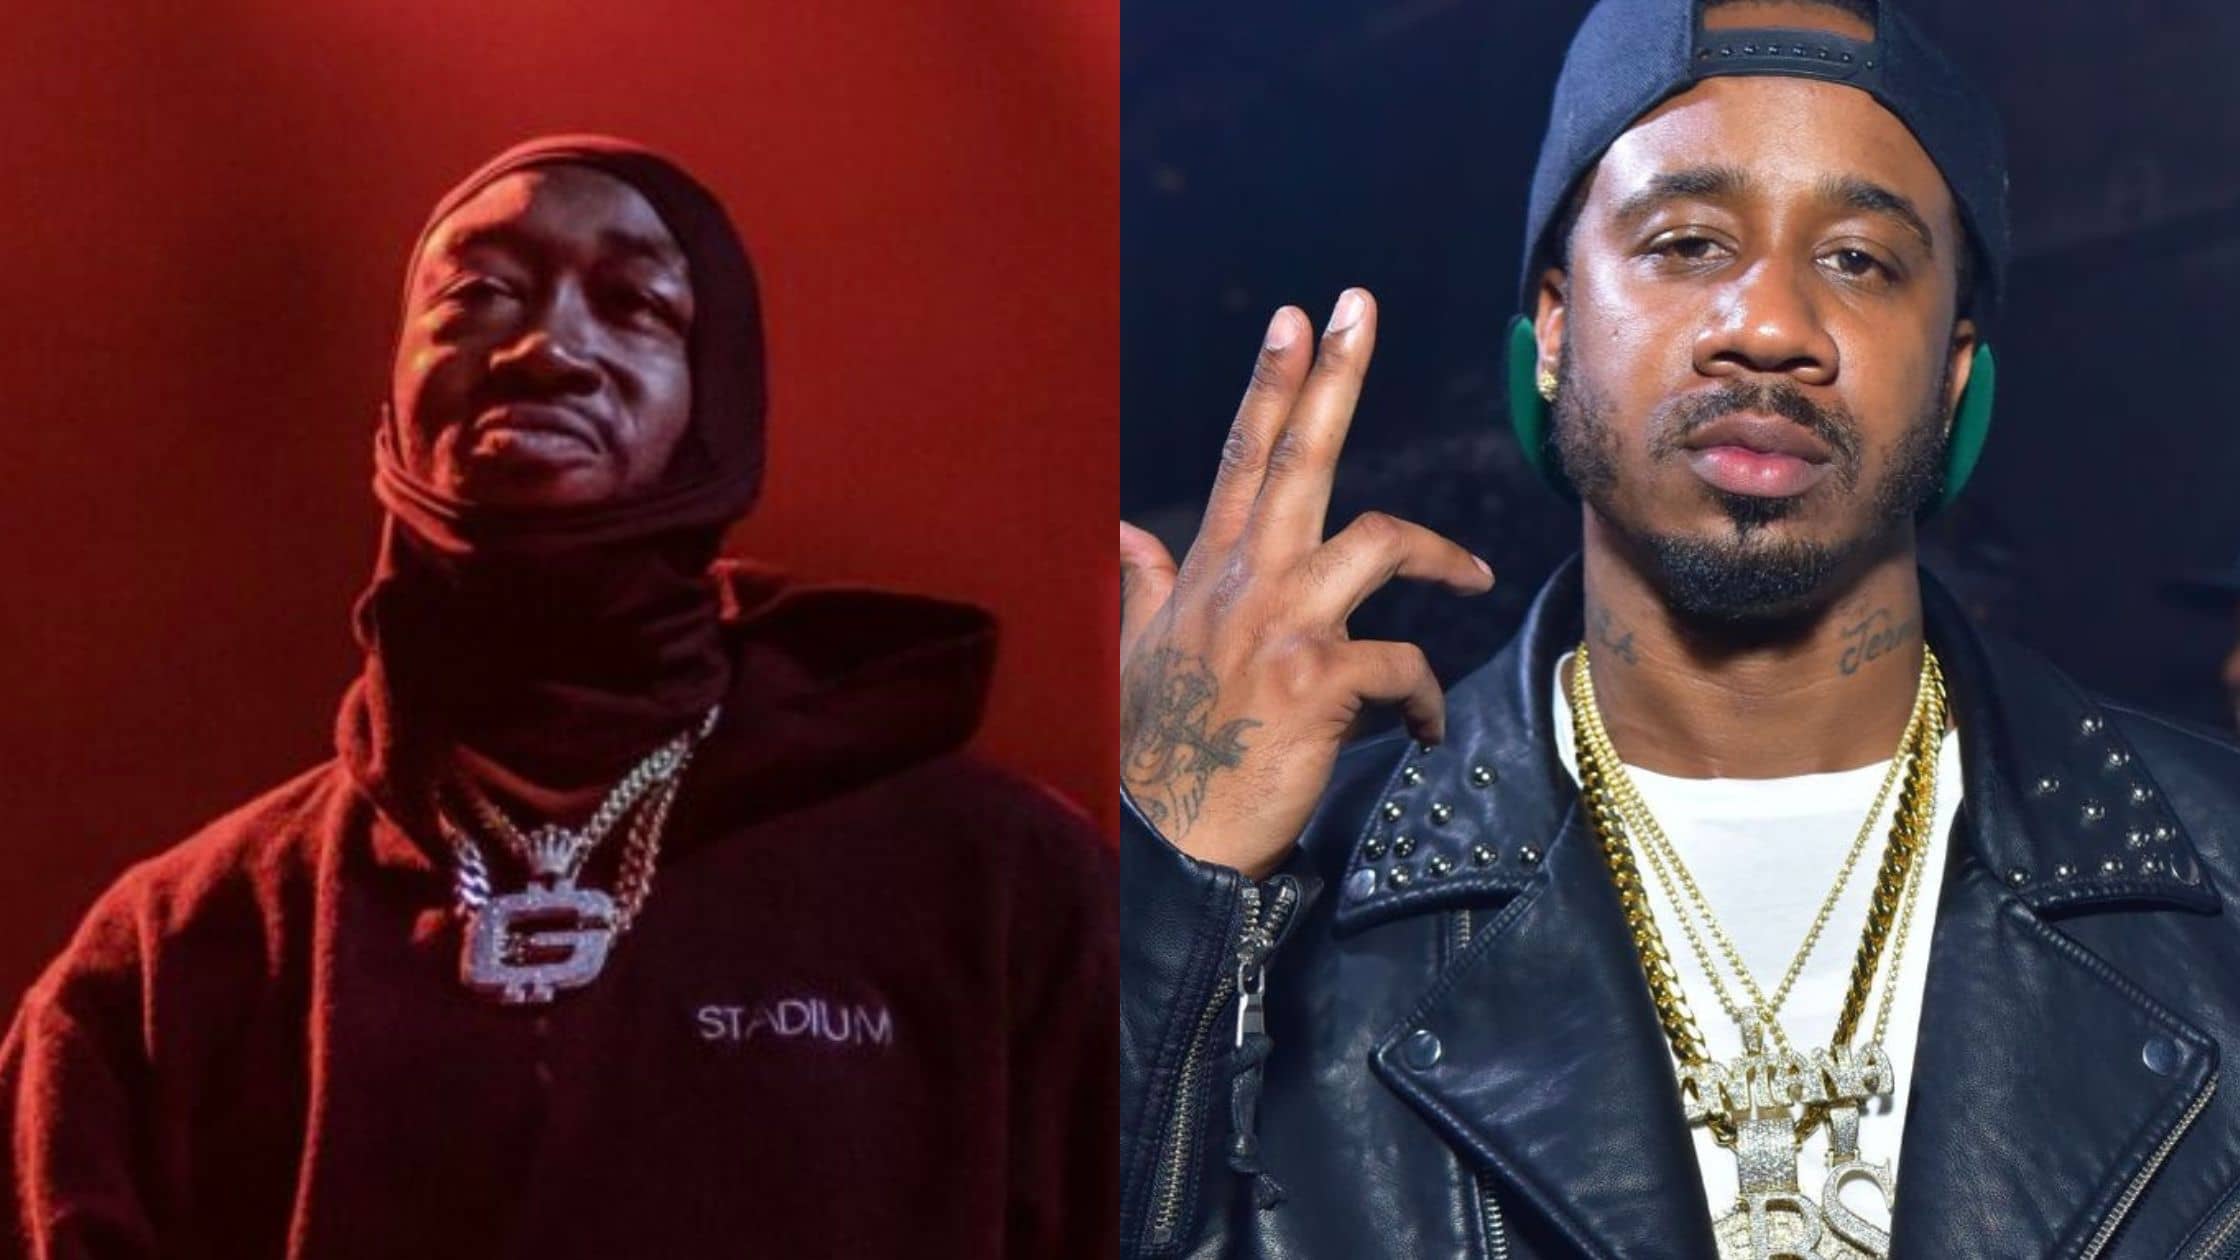 Freddie Gibbs Claims Benny The Butcher Tried To Have Him Killed During Attack In Buffalo